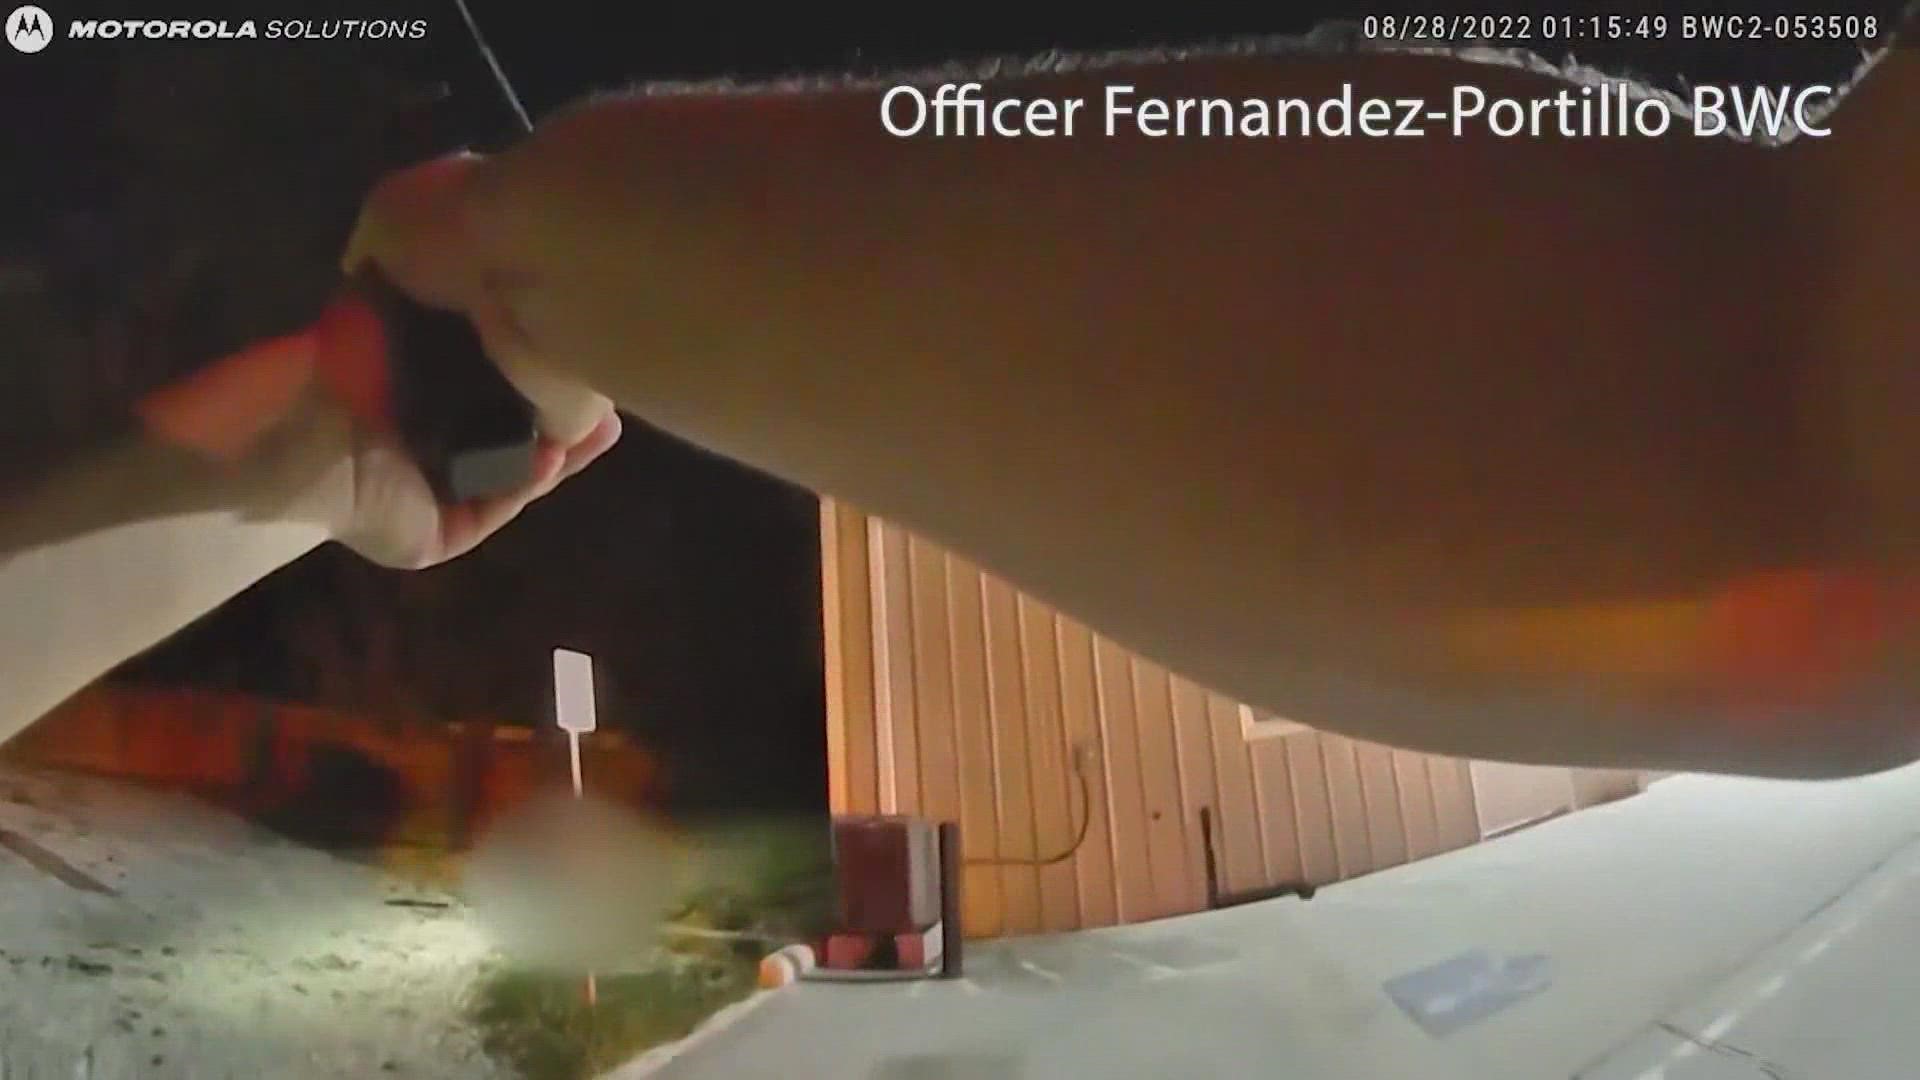 The Houston Police Department released body camera videos Monday of a man shot and killed by officers after he set fires to homes to lure and shoot residents.